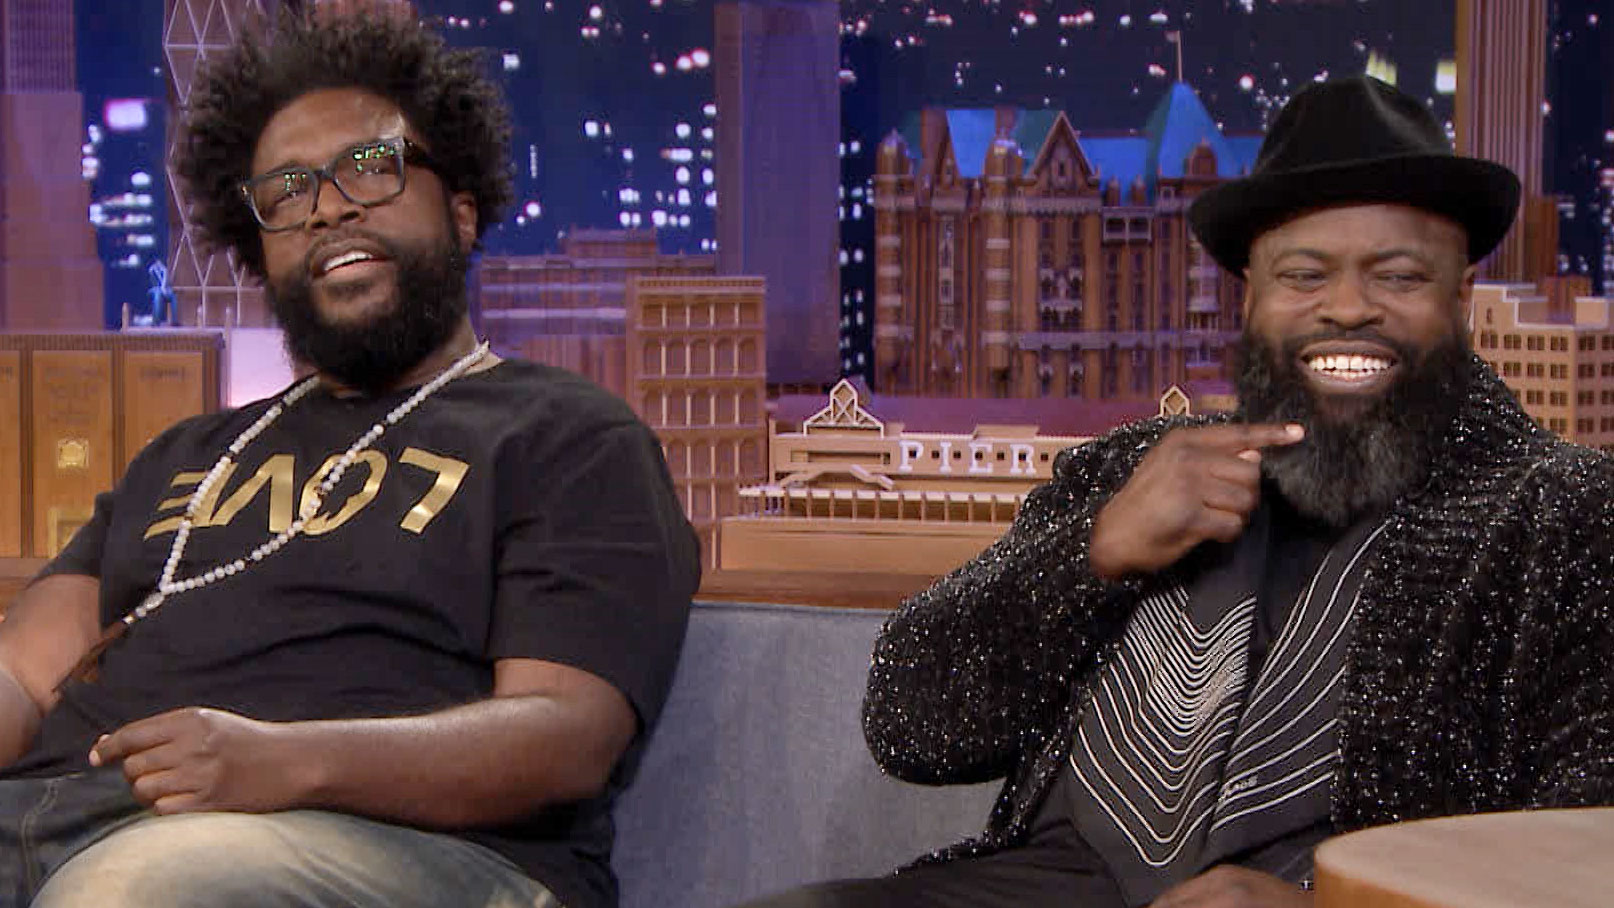 Watch The Tonight Show Starring Jimmy Fallon Highlight Know Your Roots With Questlove And Tariq